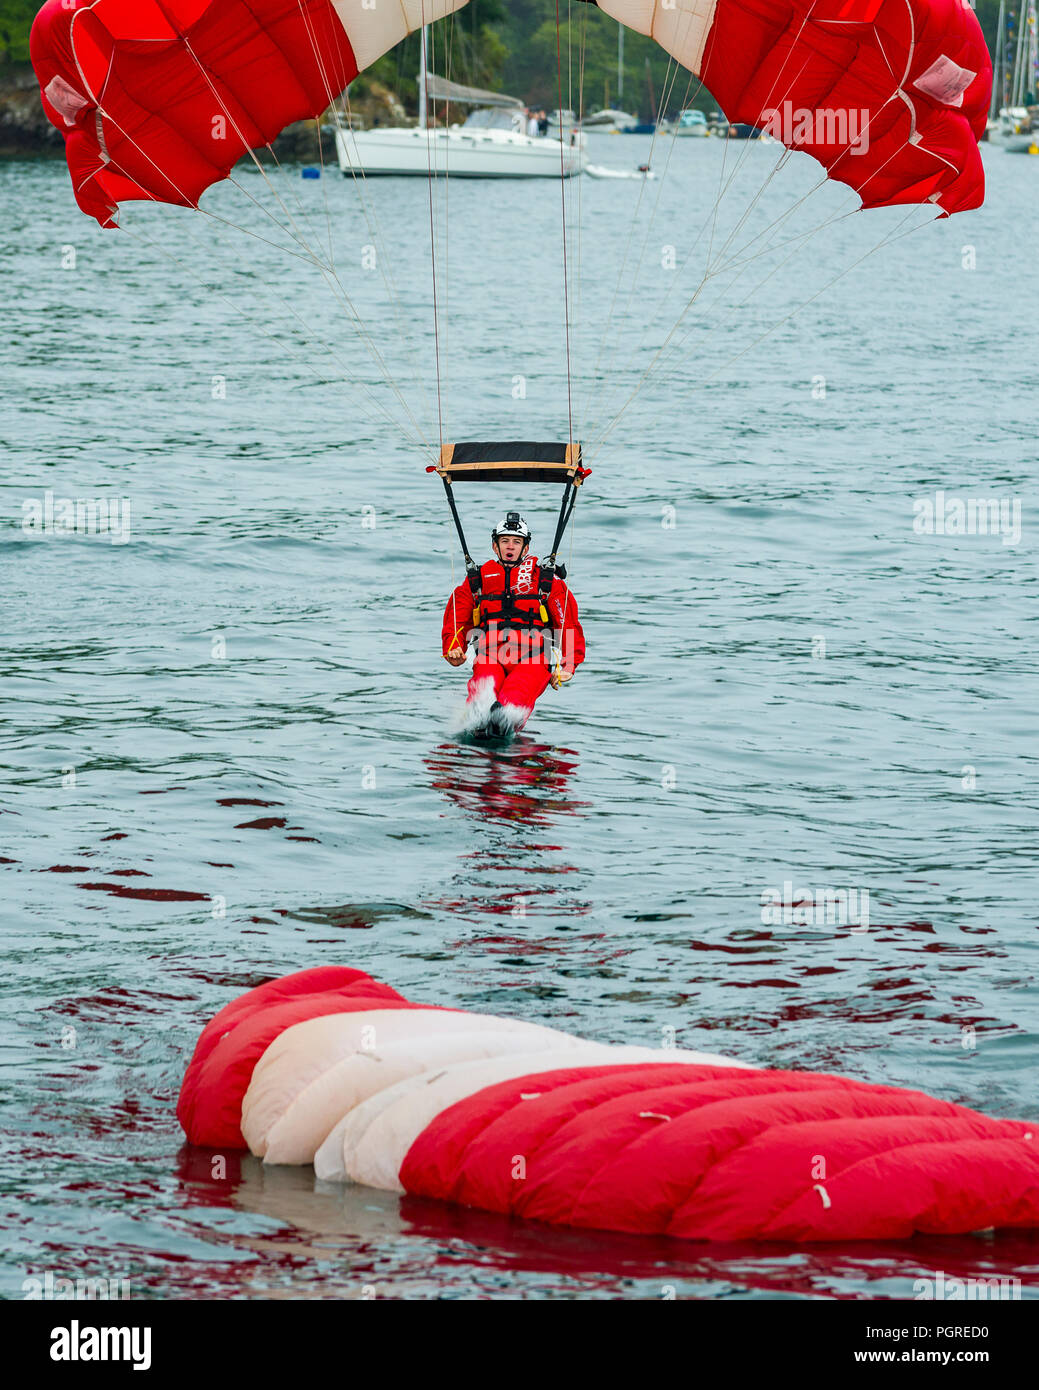 24/08/2018, Fowey, Cornwall, UK. Parachute diplay team The Red Devils make a low level jump into the Fowey River estuary at The Fowey Royal Regatta Stock Photo